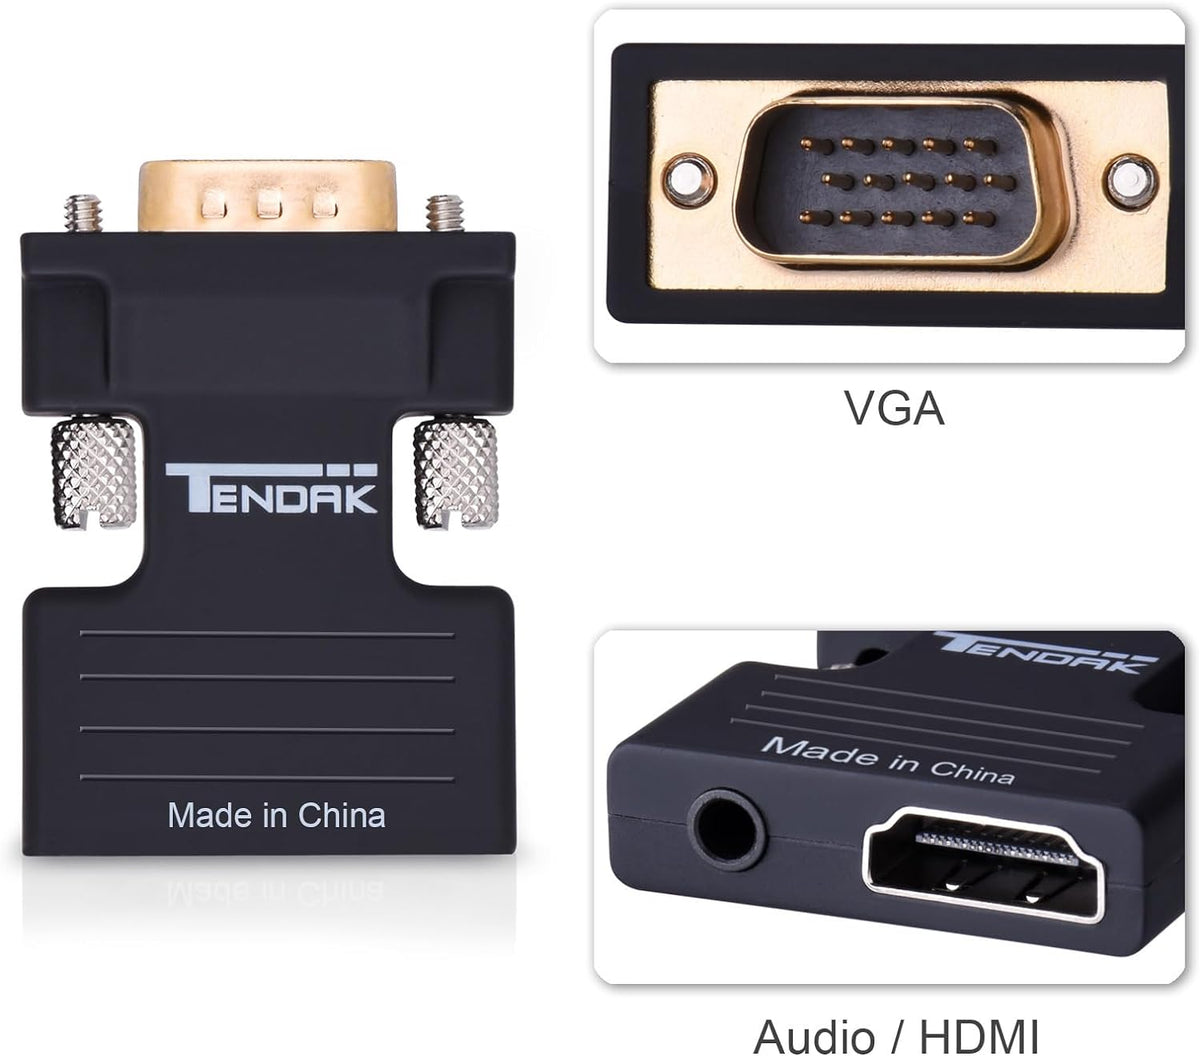 Tendak Active 1080P Female HDMI to VGA Male Converter Adapter Dongle with 3.5mm Stereo Audio Portable HDMI Connector for Laptop PC PS3 Xbox STB Blu-ray DVD TV Stick